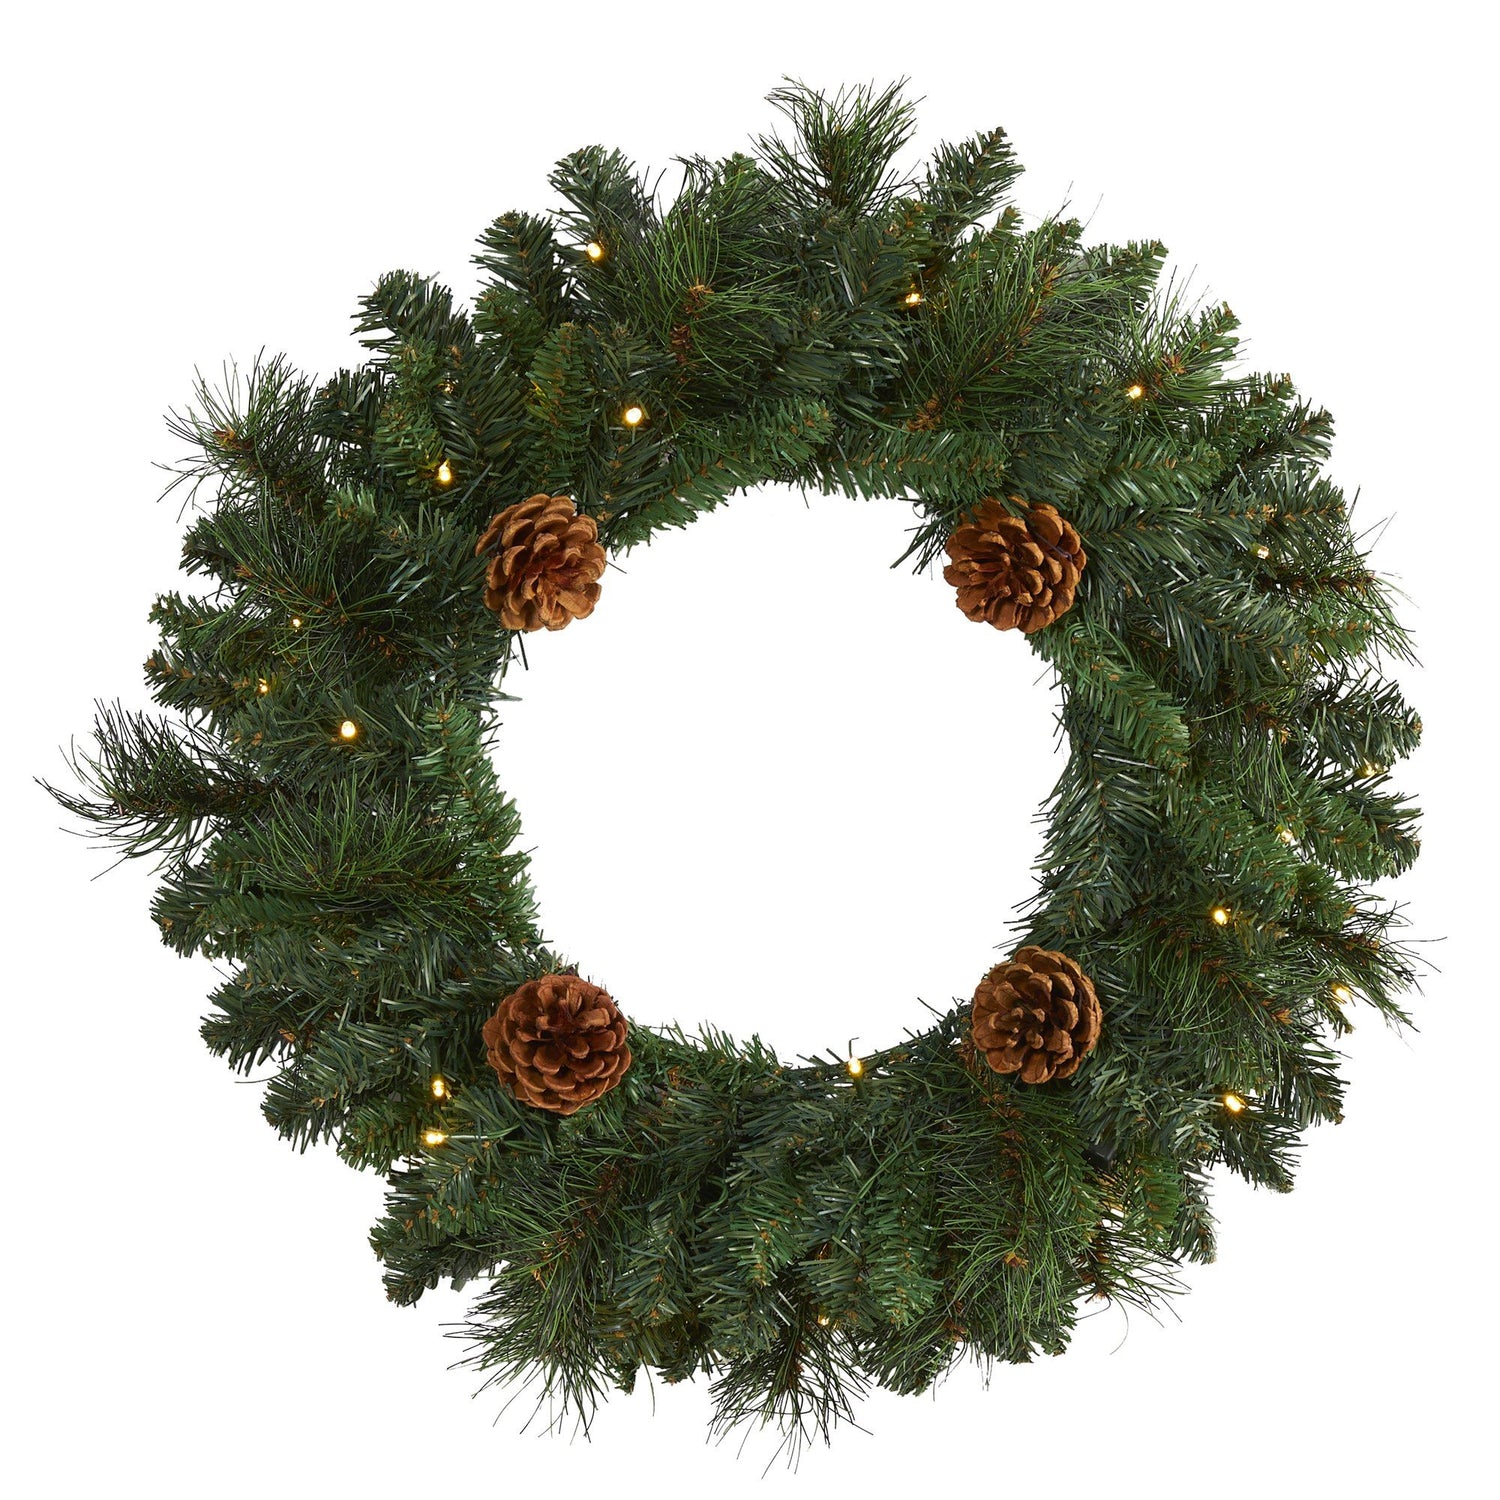 20” Pine Artificial Christmas Wreath with 35 LED Lights and Pinecones